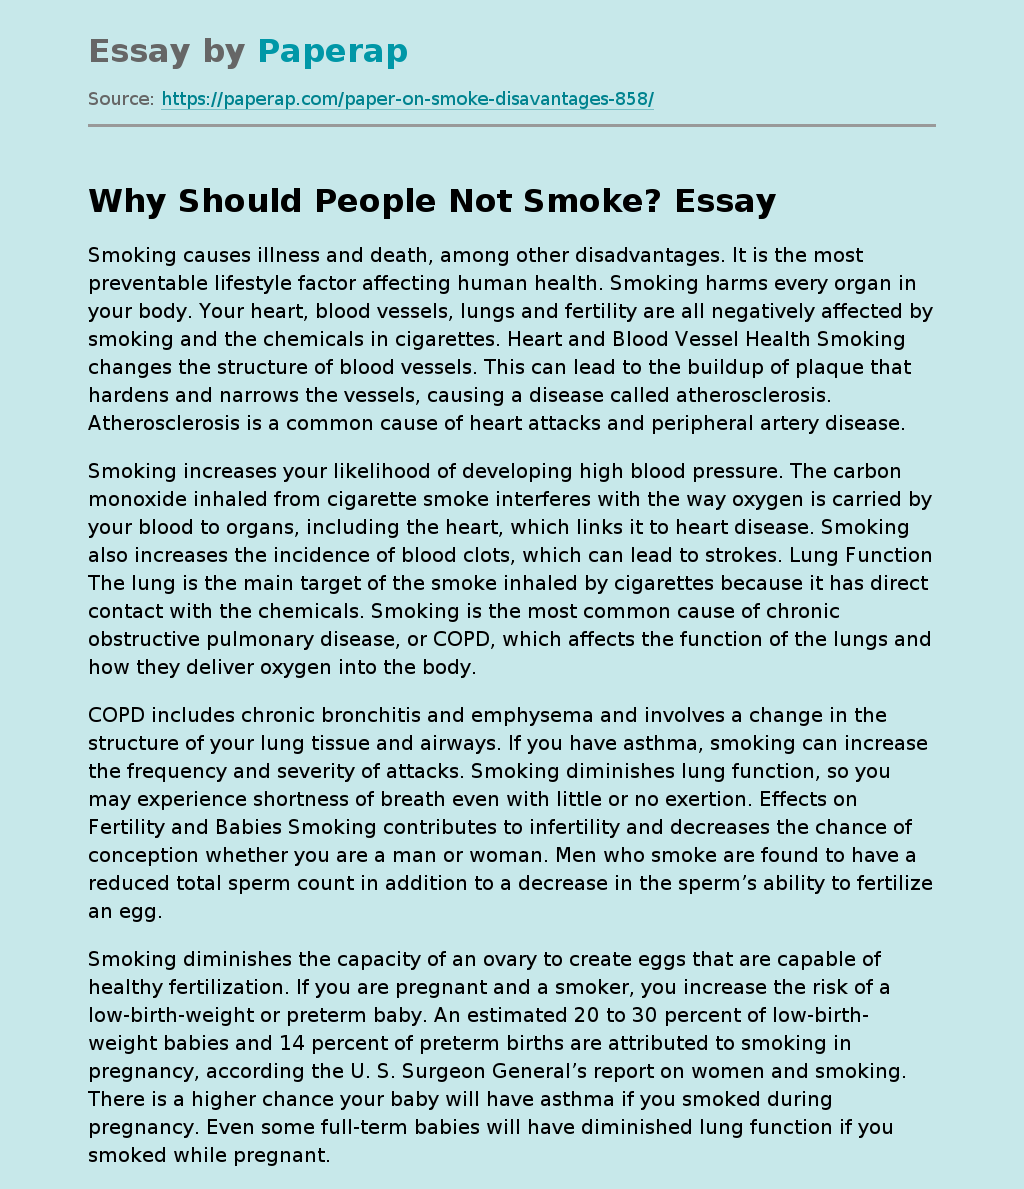 Why Should People Not Smoke?